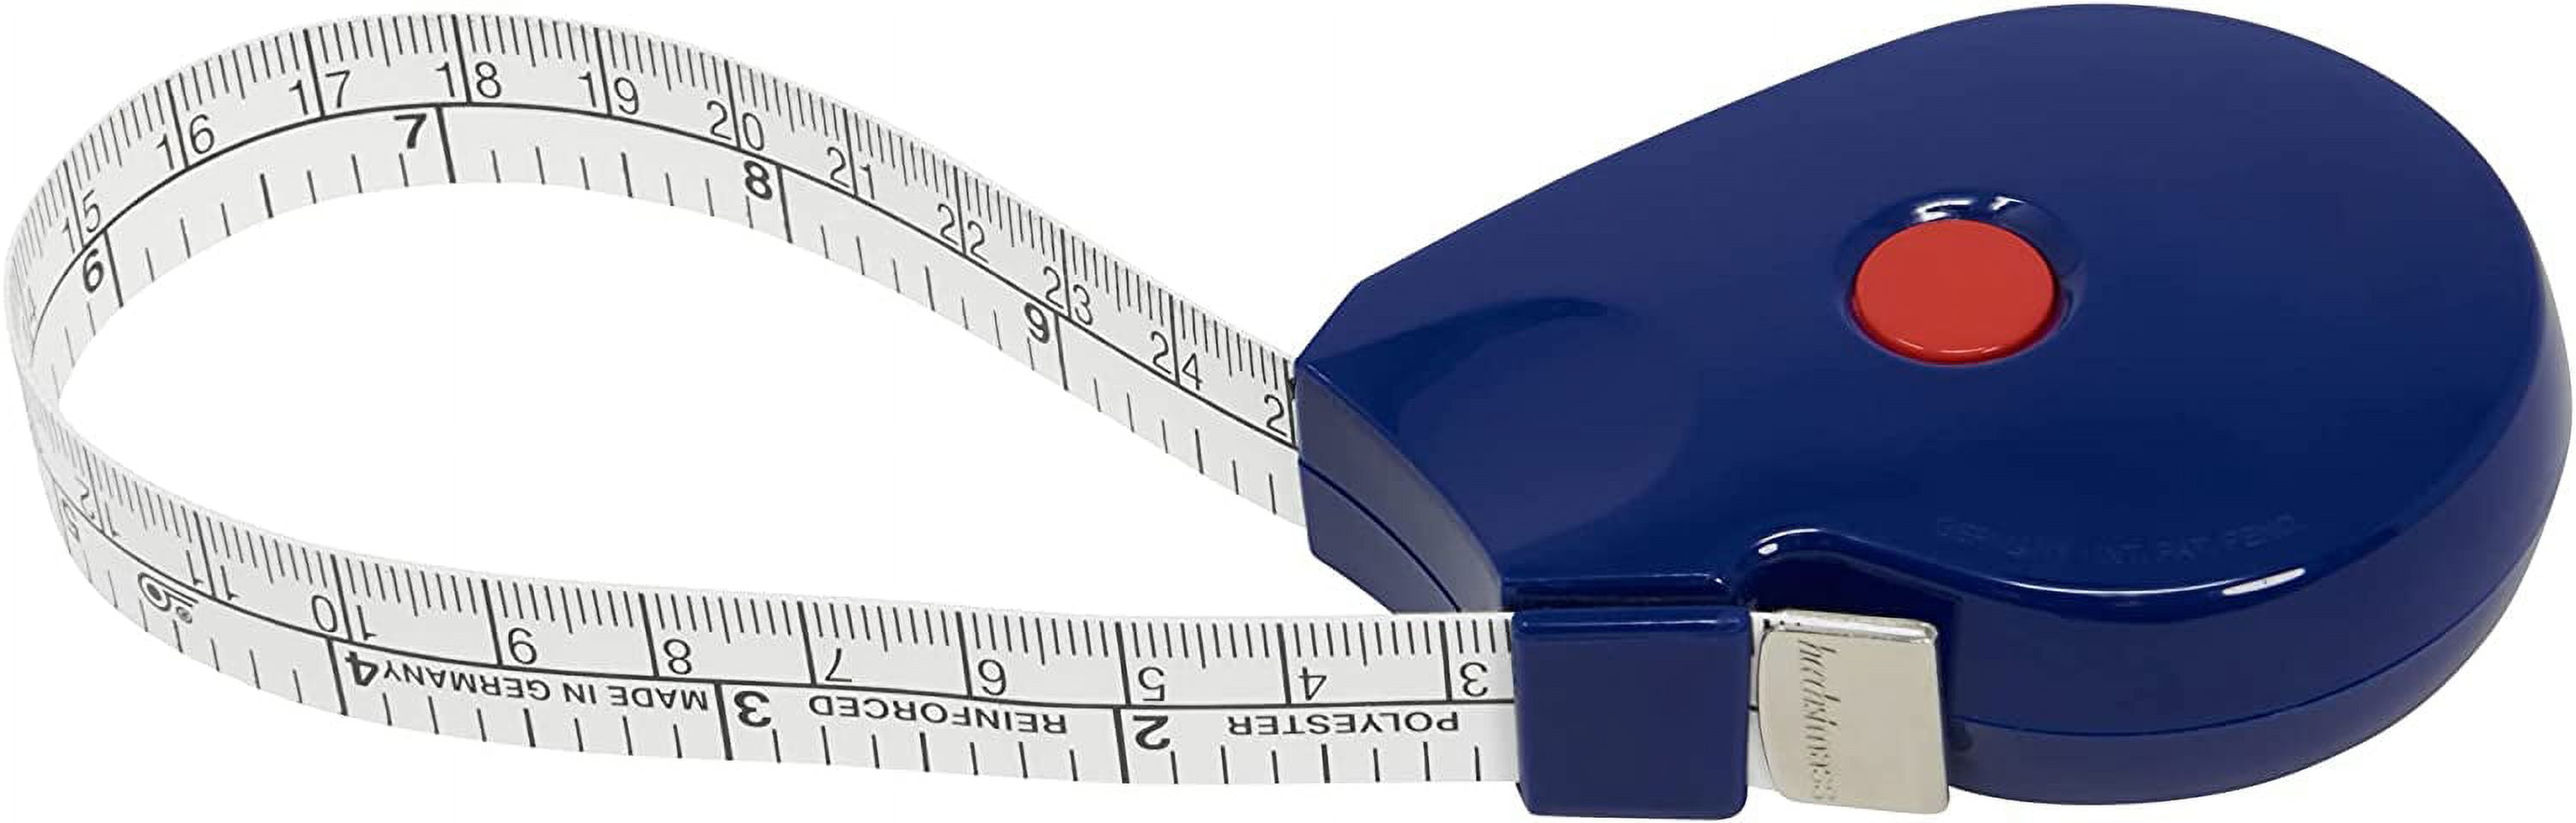 Wrap 'N Stay Retractable Tape Measure - 60 - Metric/Inches - WAWAK Sewing  Supplies